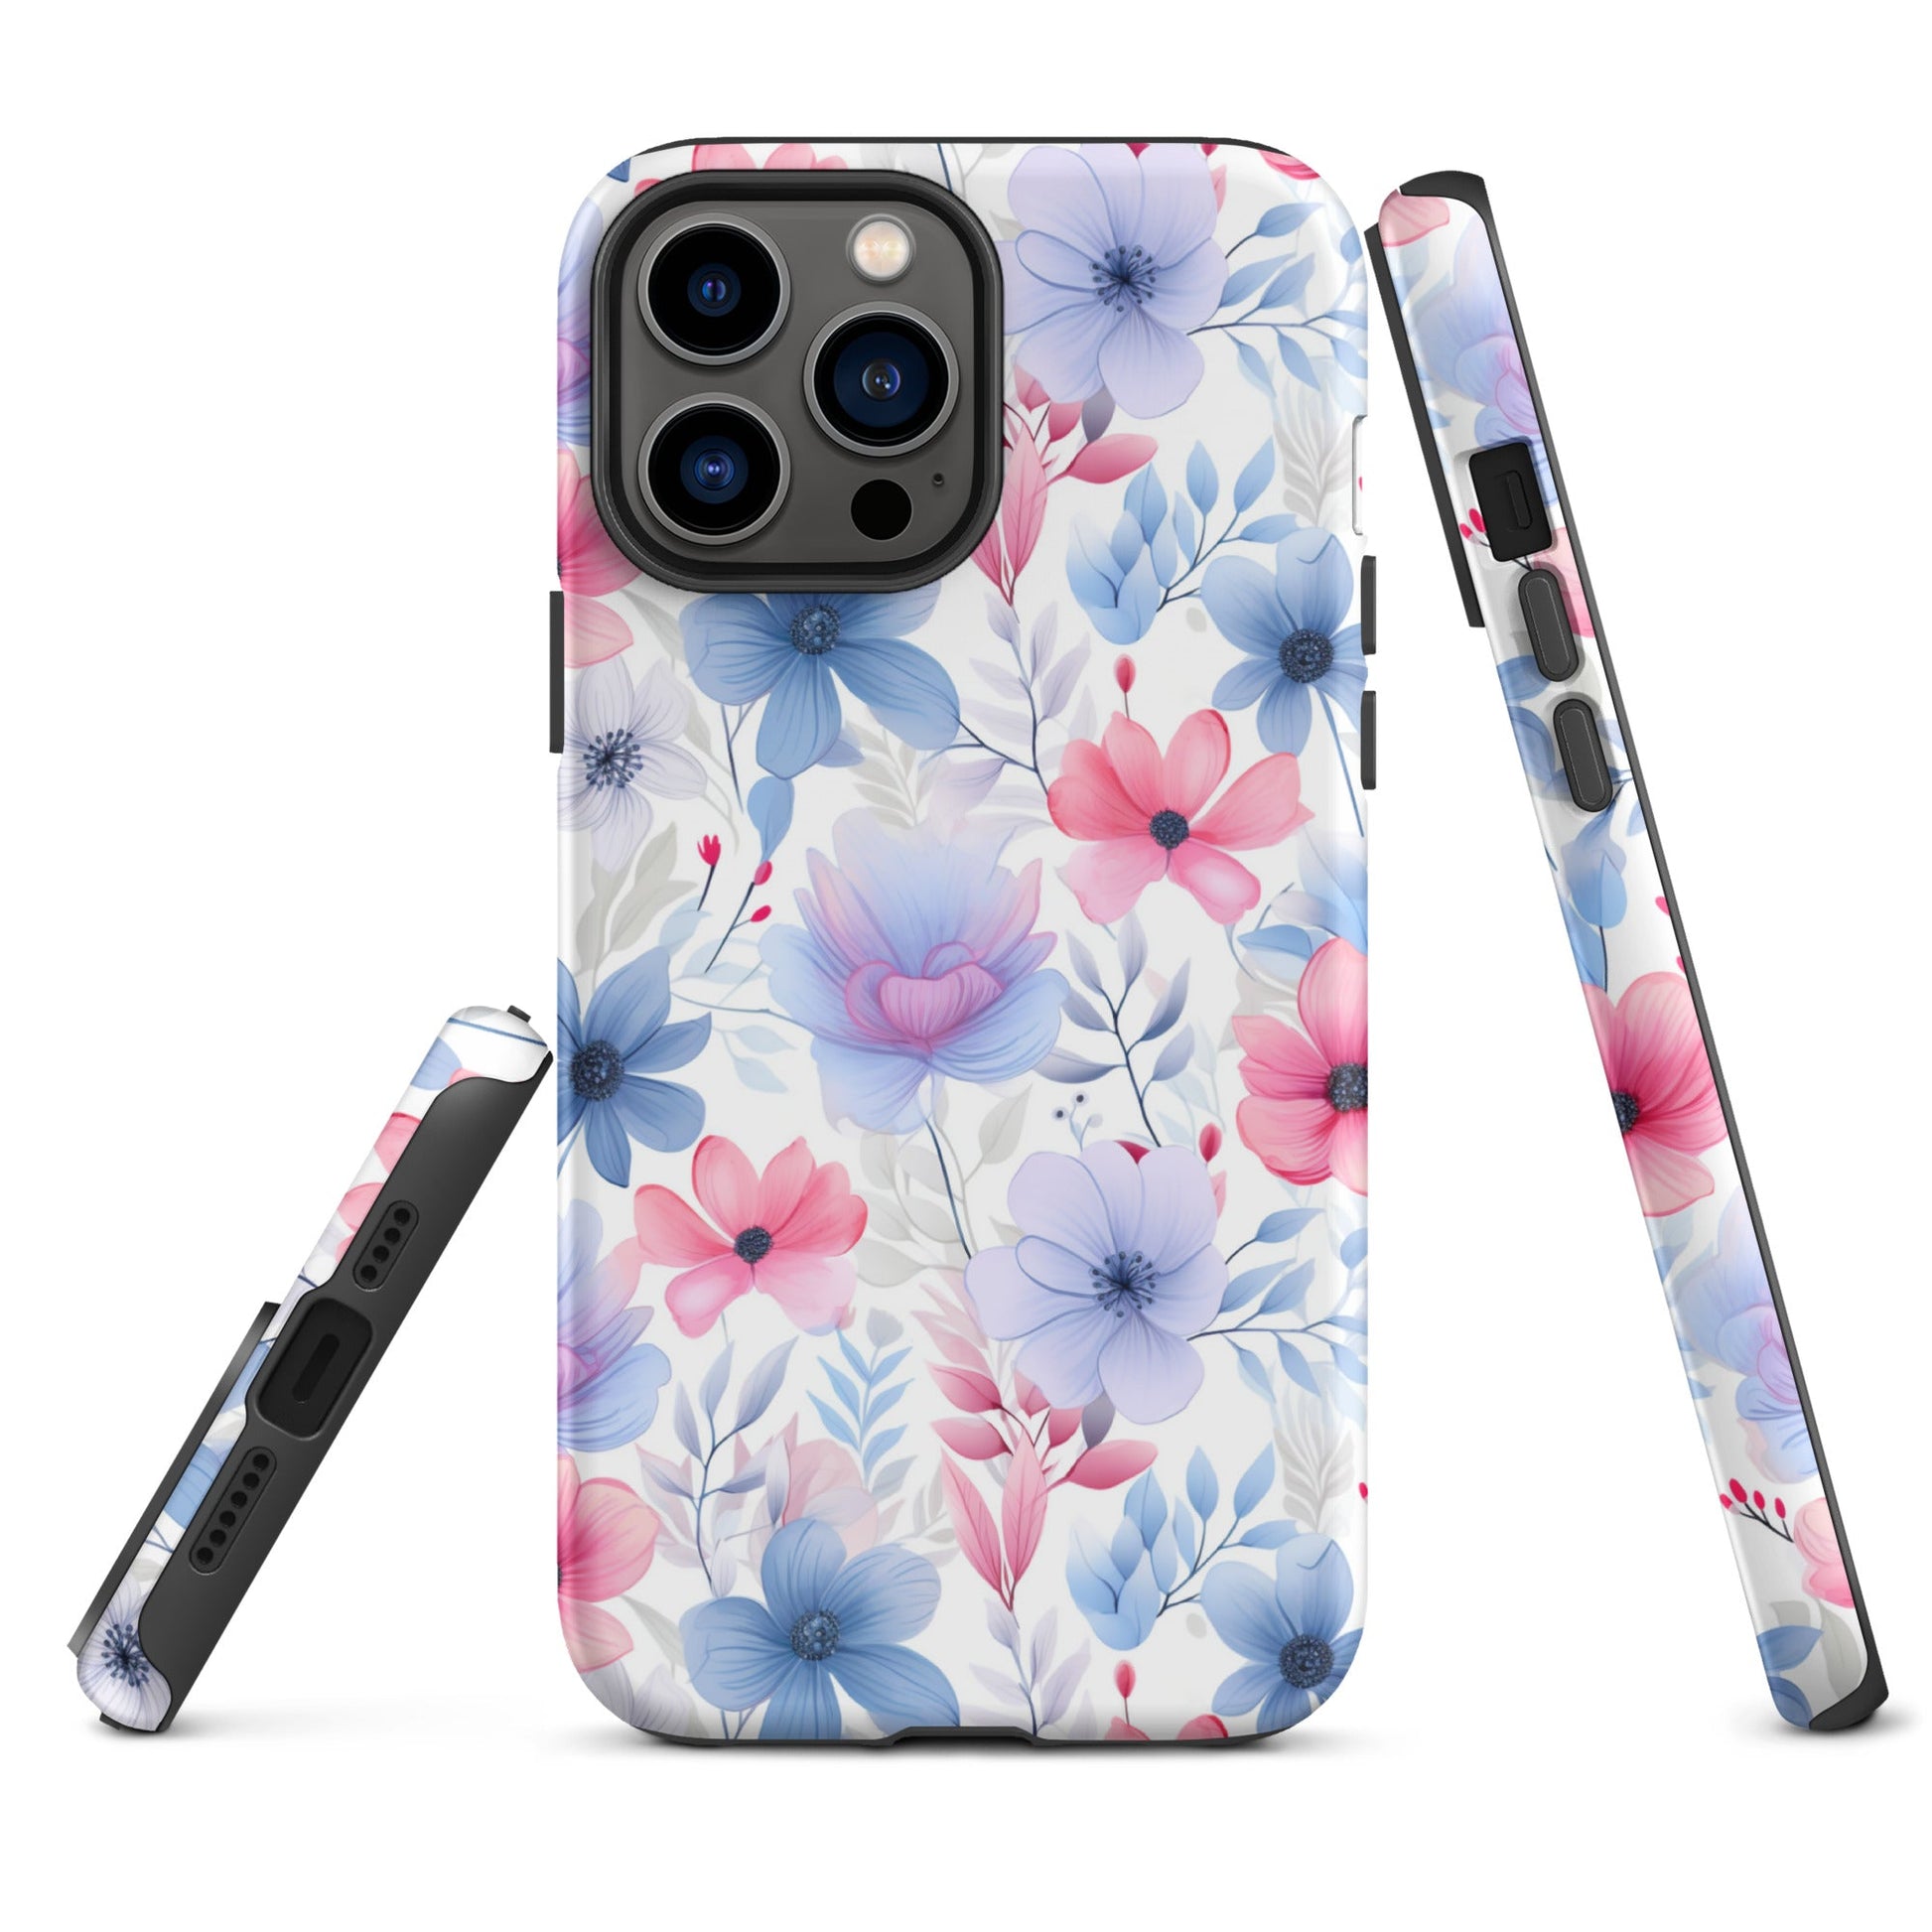 Floral Whispers - Subtle Shades - iPhone Case - Pattern Symphony